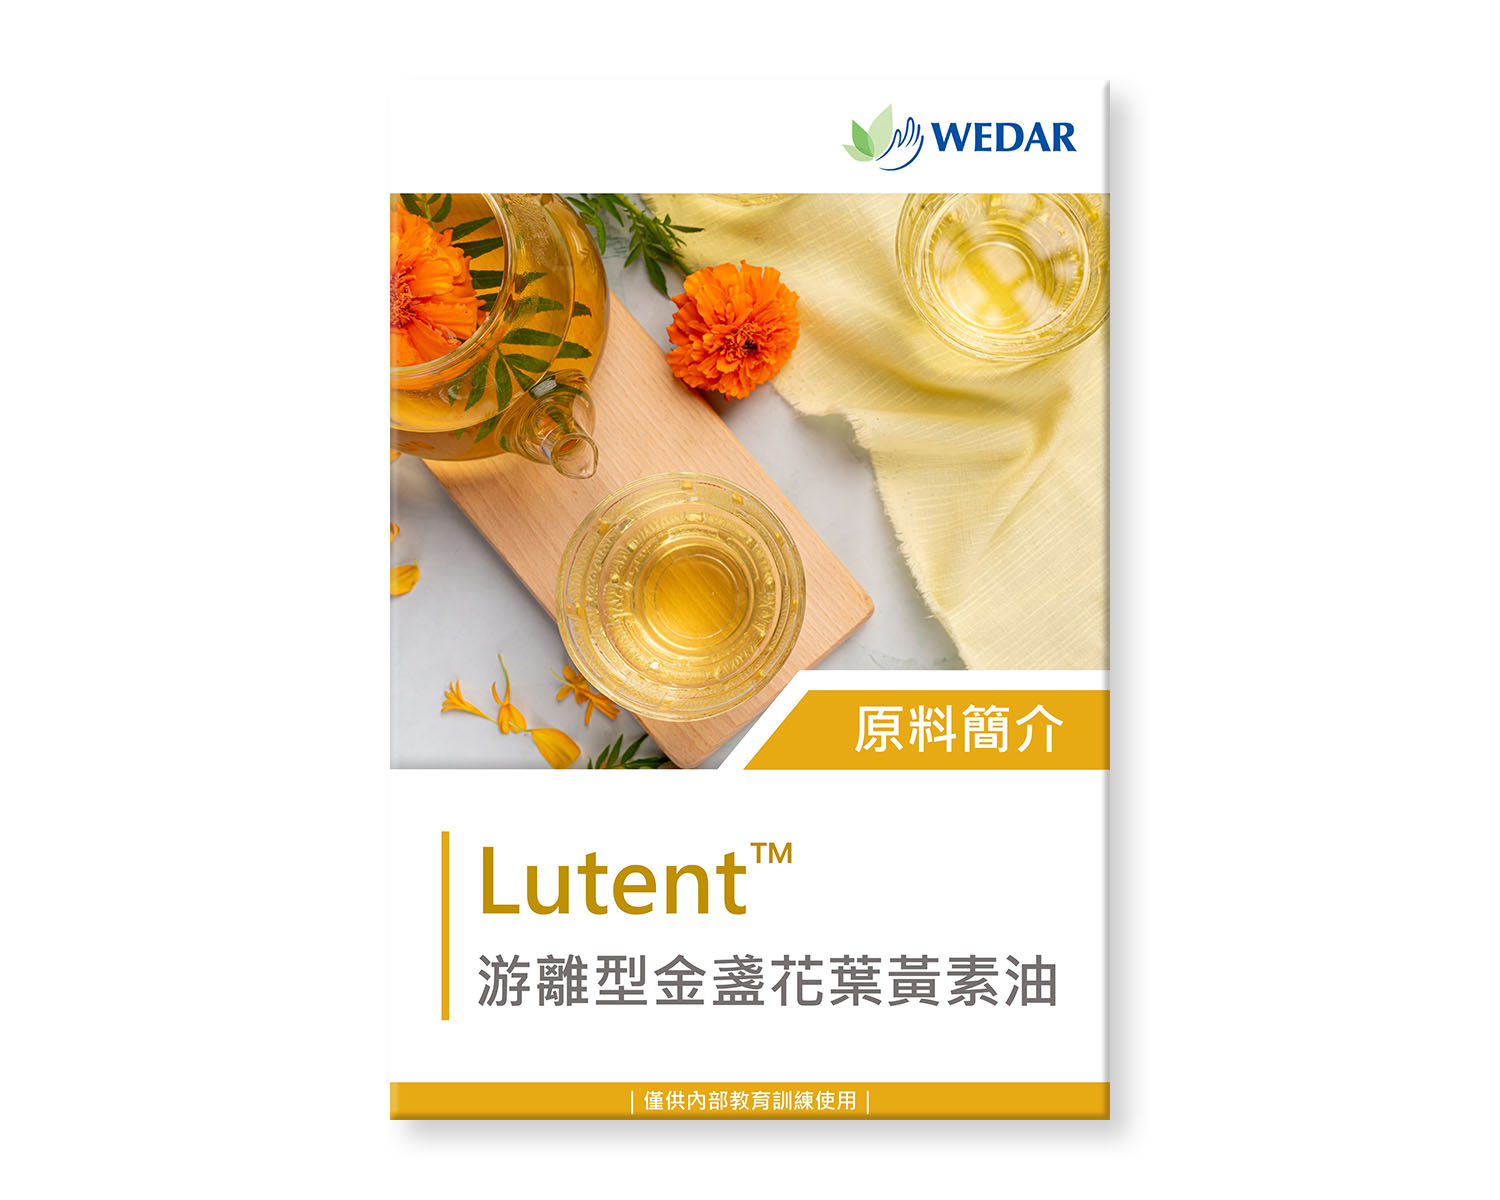 You are currently viewing Lutent™ 游離型金盞花葉黃素油